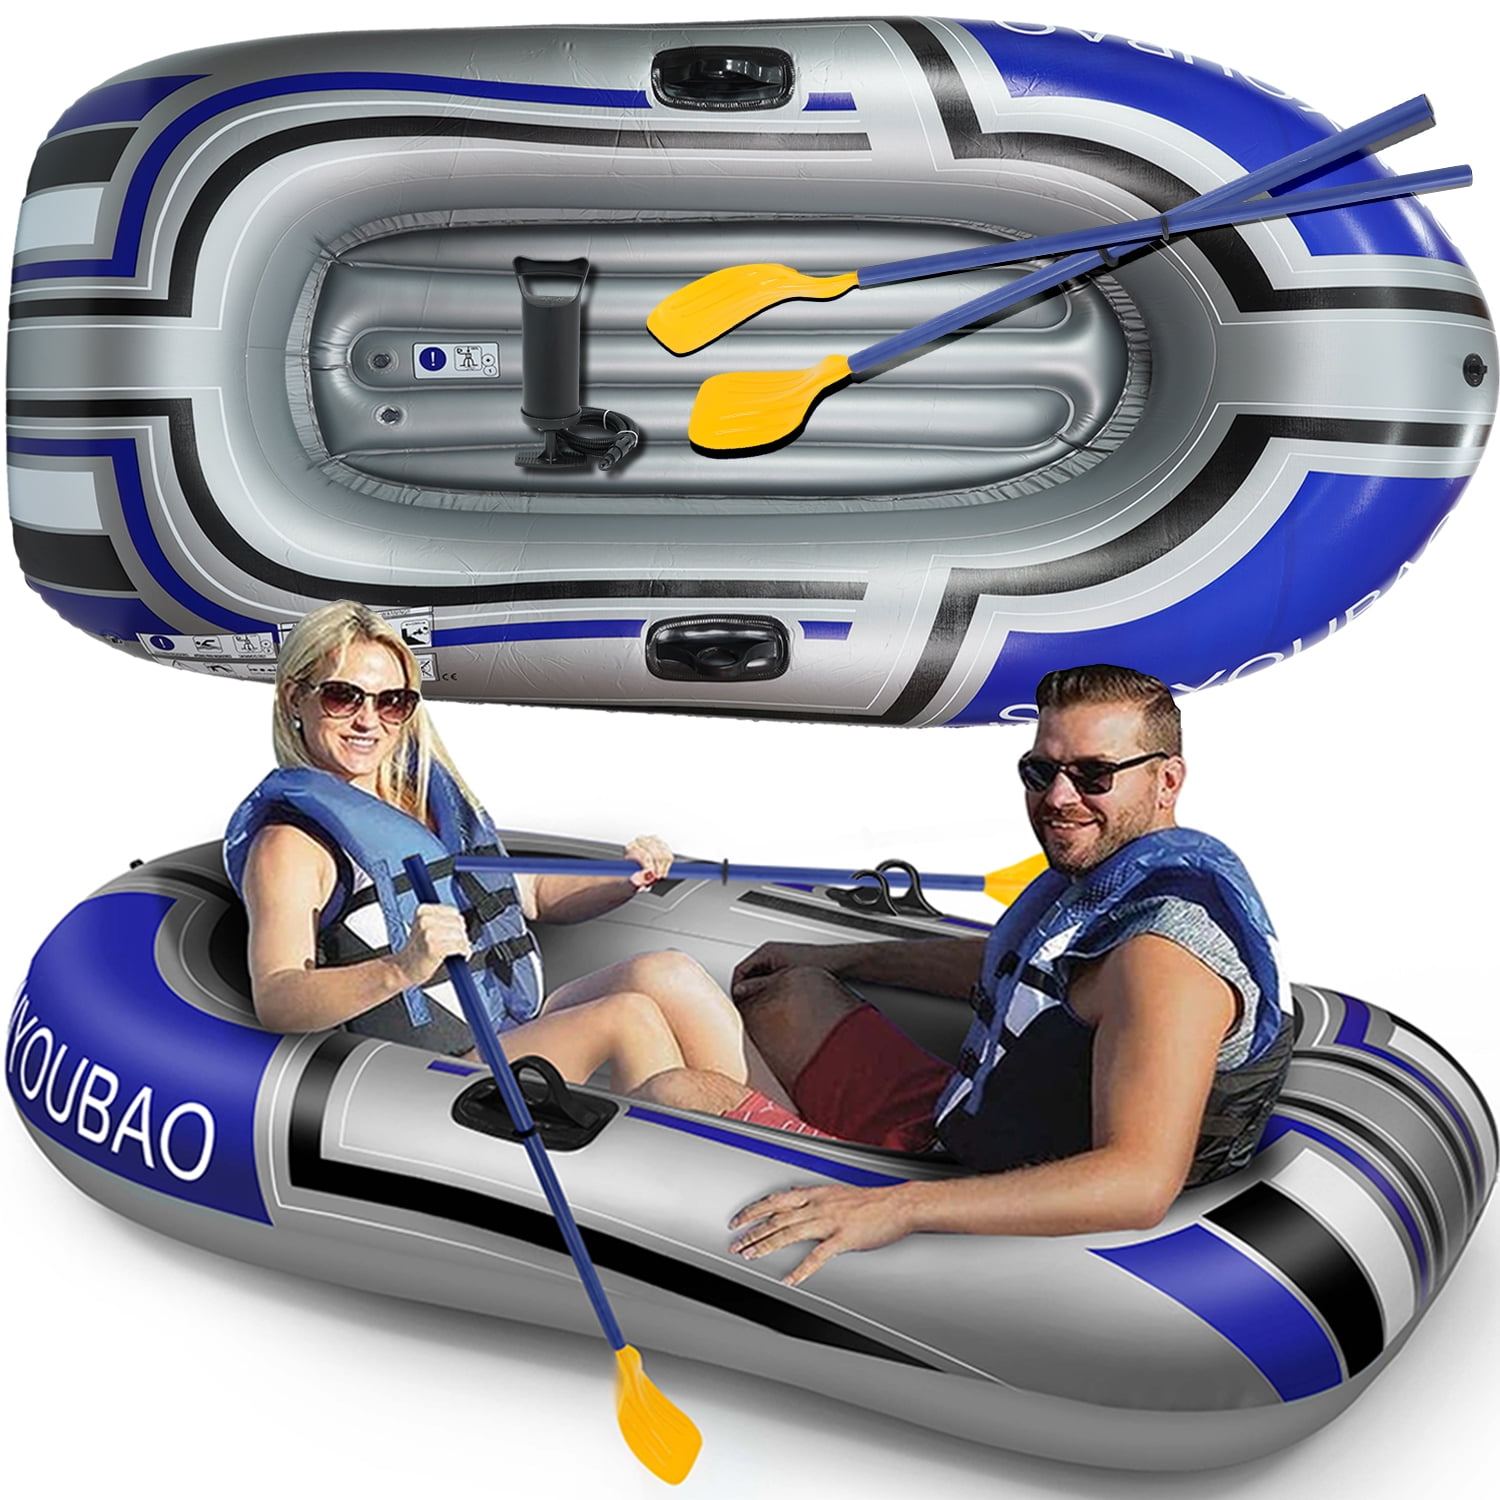 HZH Inflatable Boat, Kayak, Inflatable Boat Canoe Inflatable Fishing Kayak  Rafting Fishing Boats Portable Fishing Boat Raft with Oars Pump